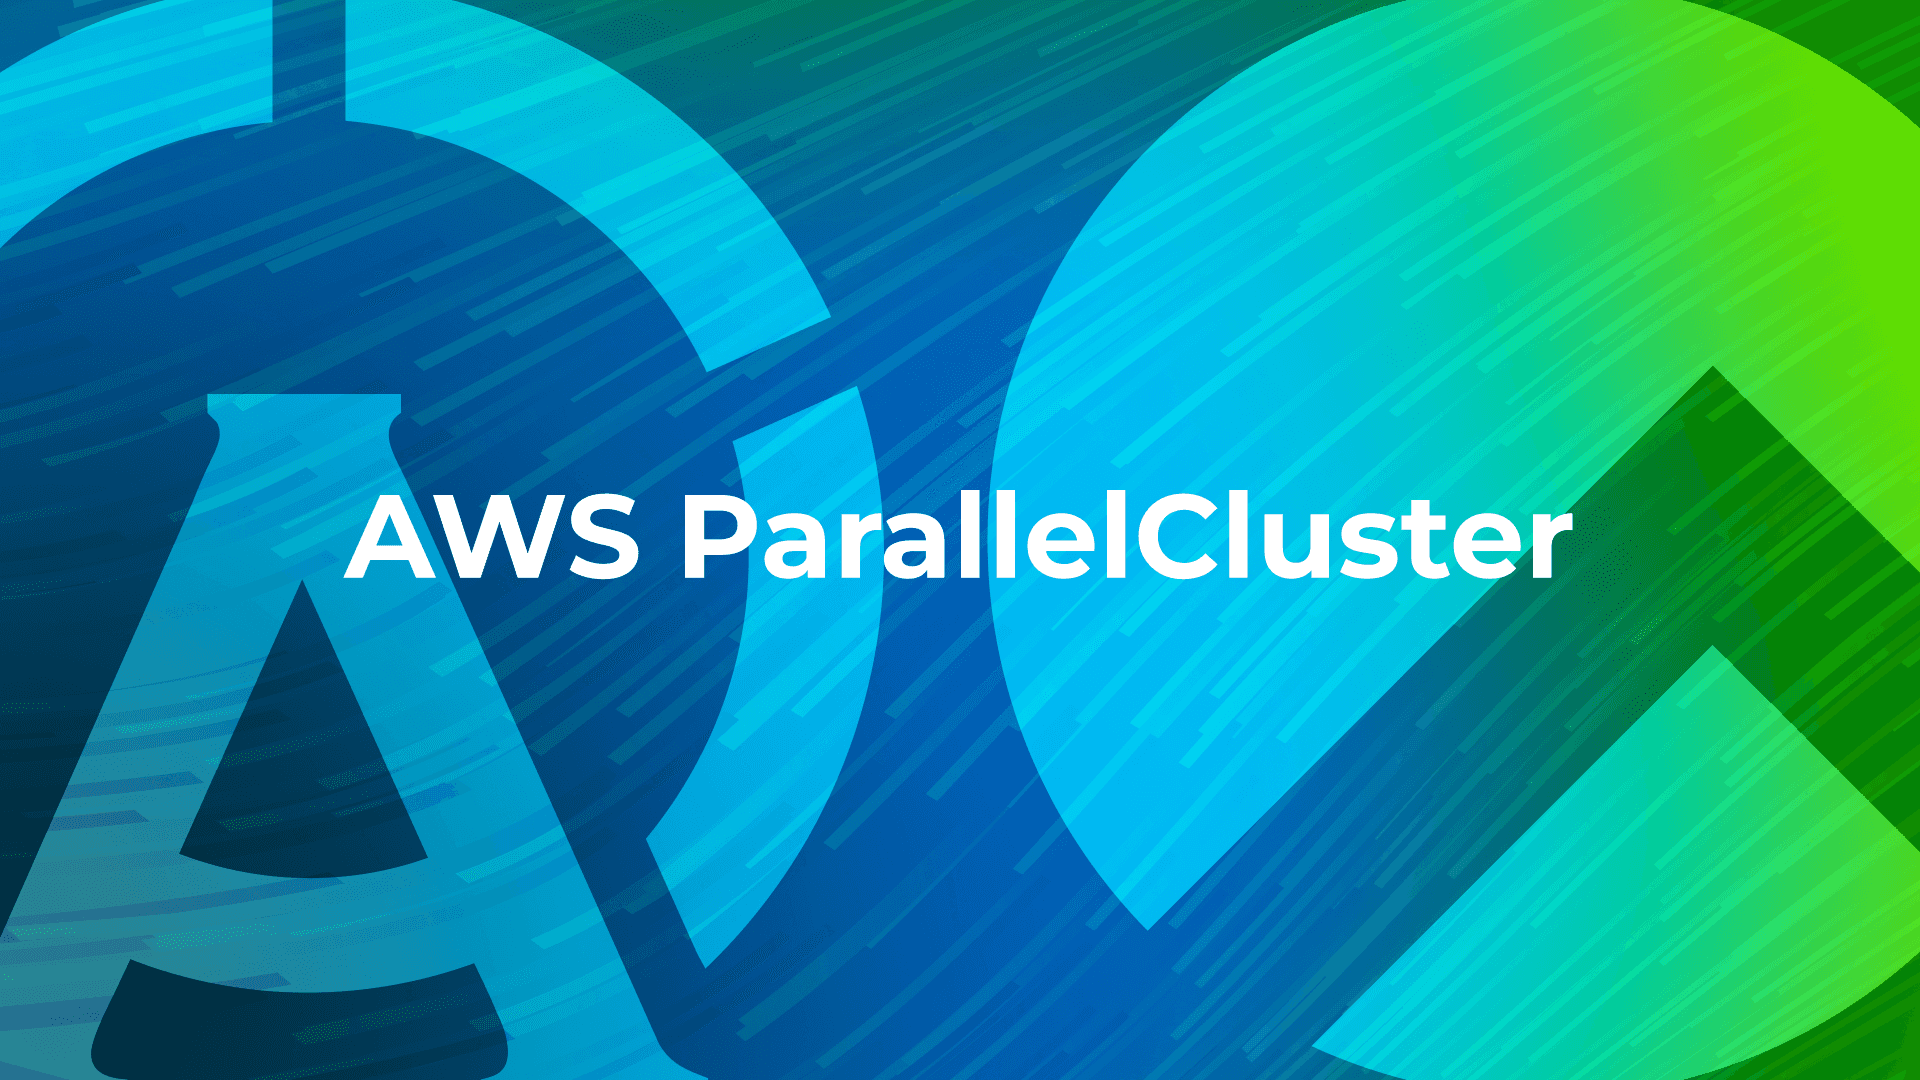 How to Build an Apptainer Pre-Installed Rocky Linux 8 Custom Image for AWS ParallelCluster